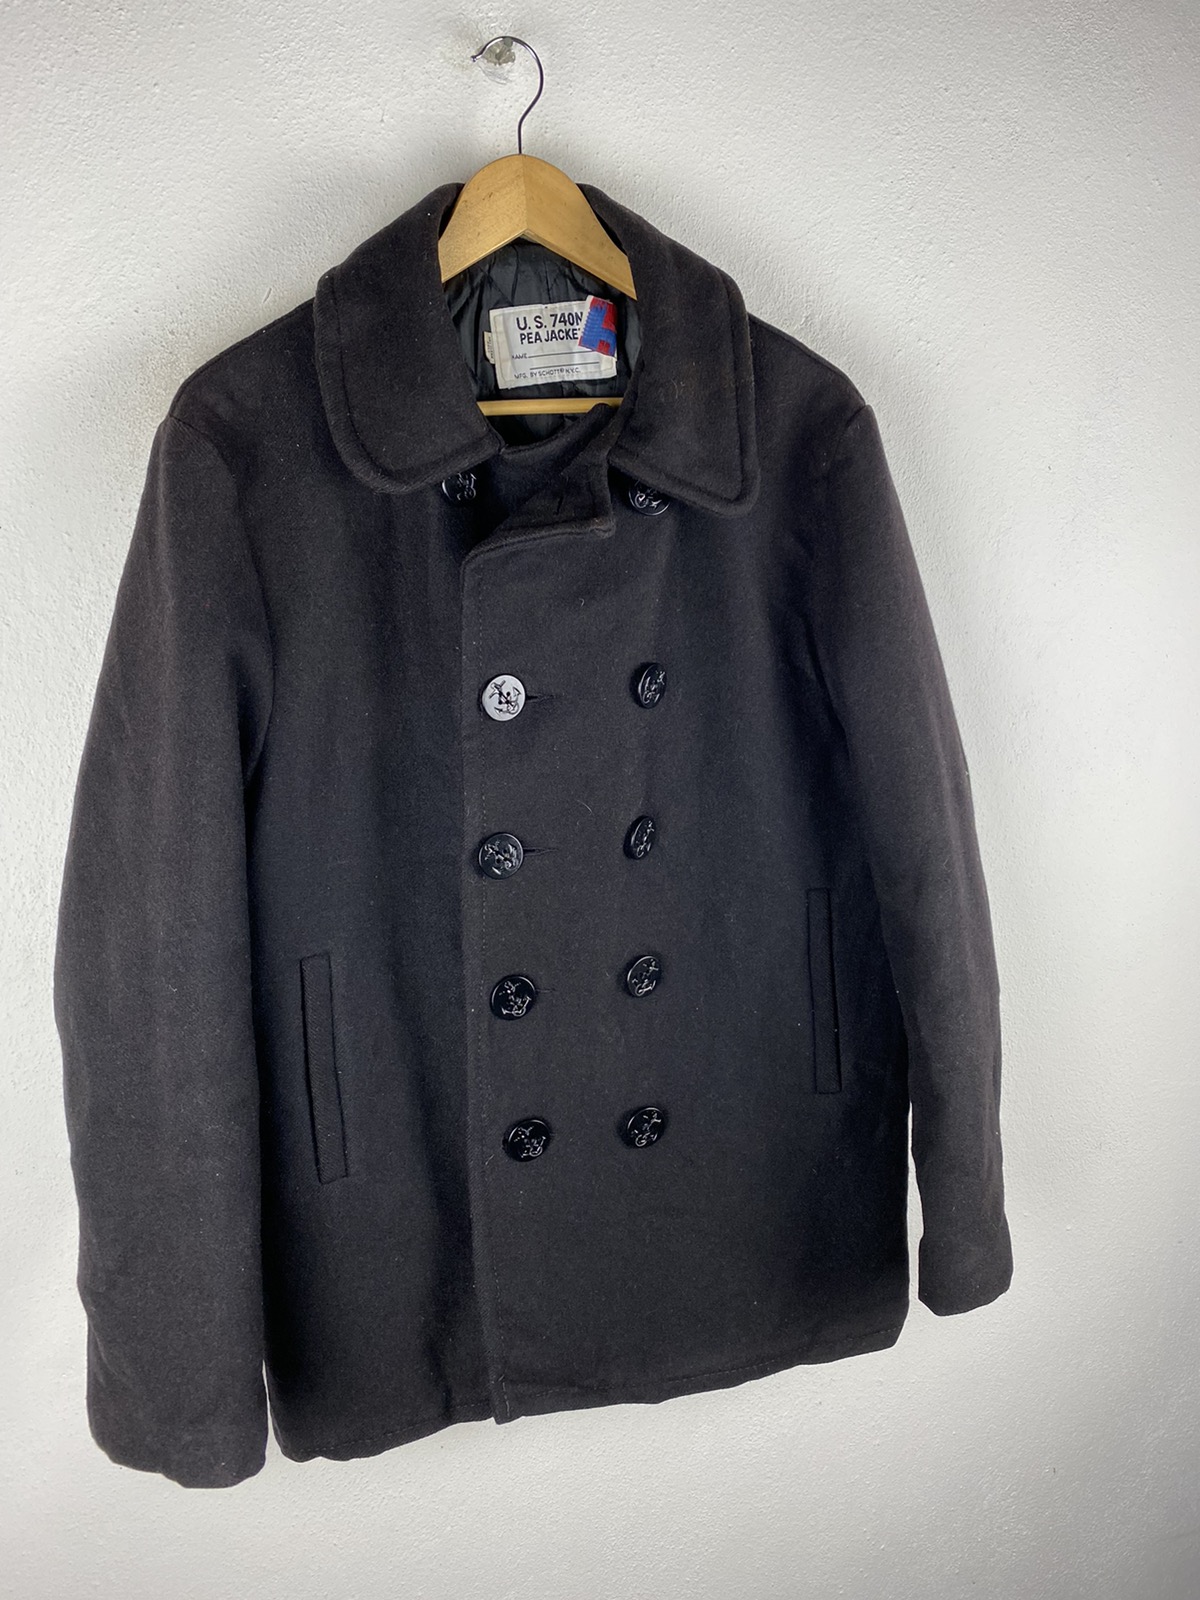 🔥SALE🔥aU.S 740N PEA JACKET BY SCHOTT MADE IN USA - 5